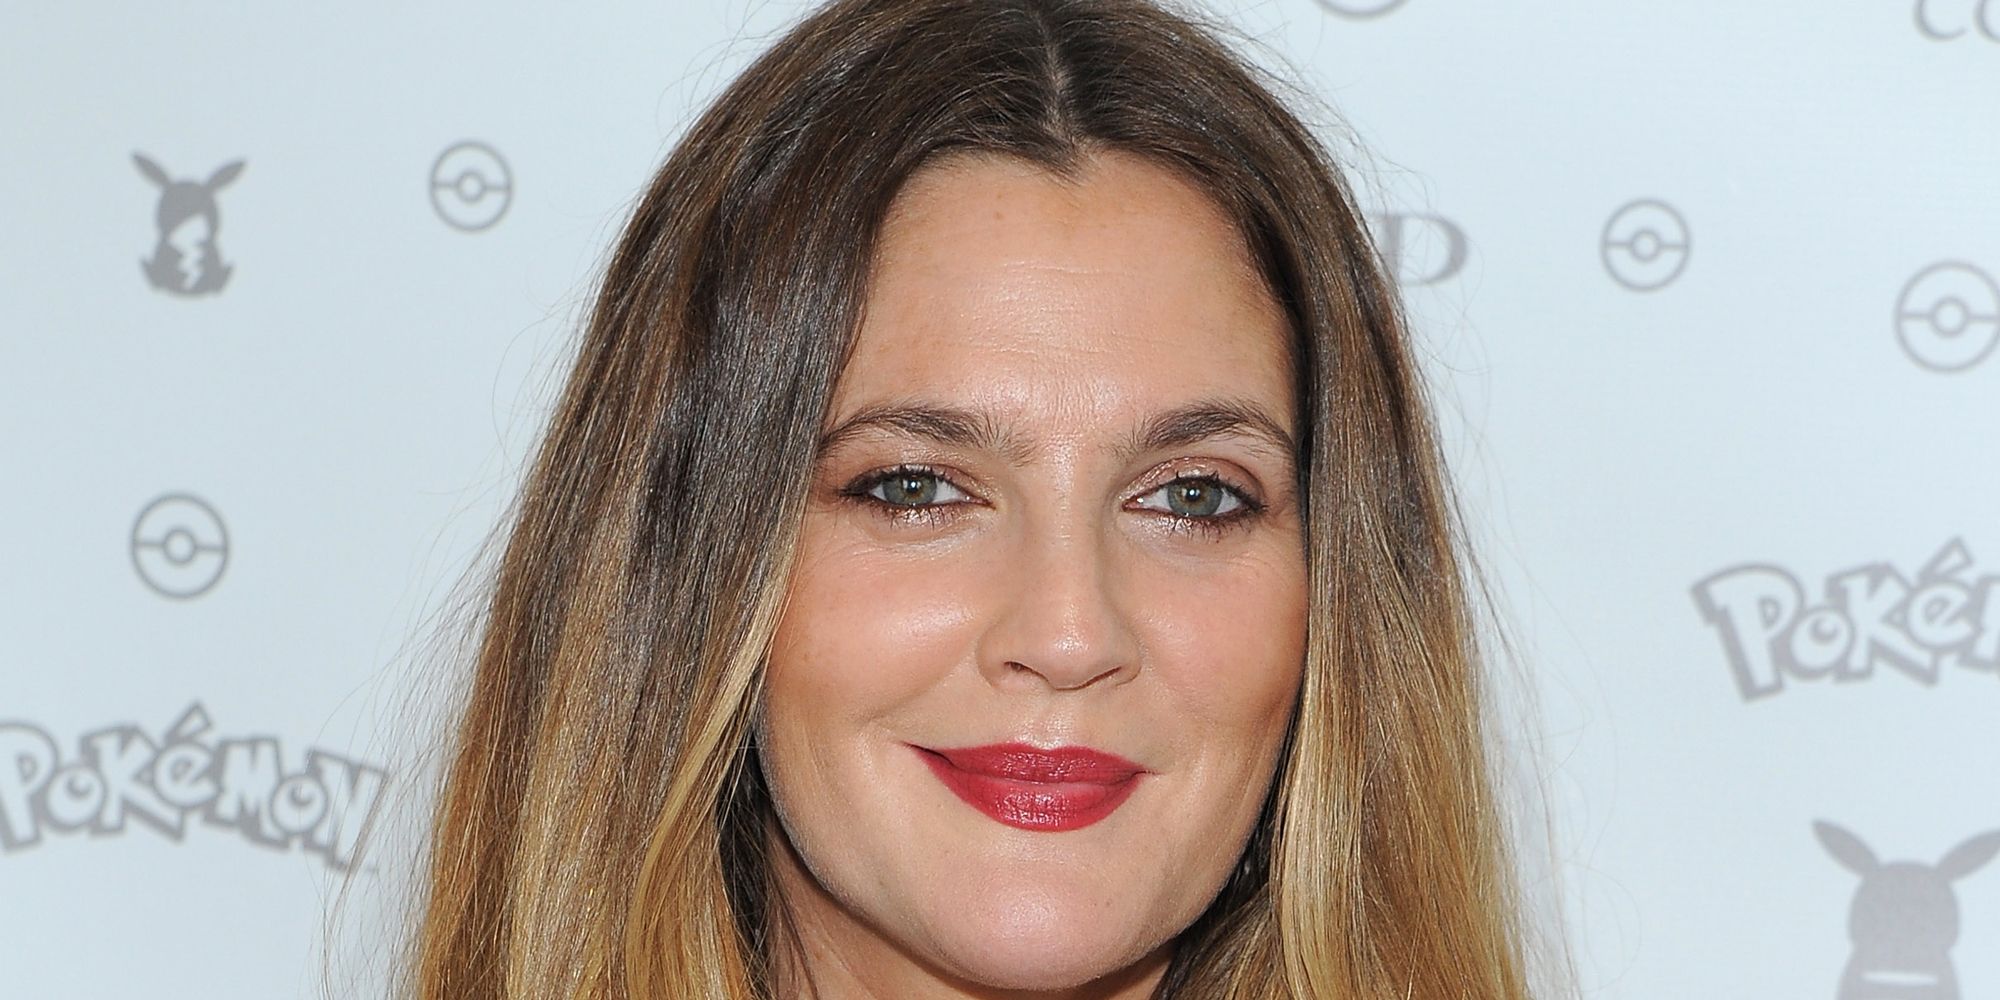 Drew Barrymore SLEEPS with her makeup on to get a smoky eye